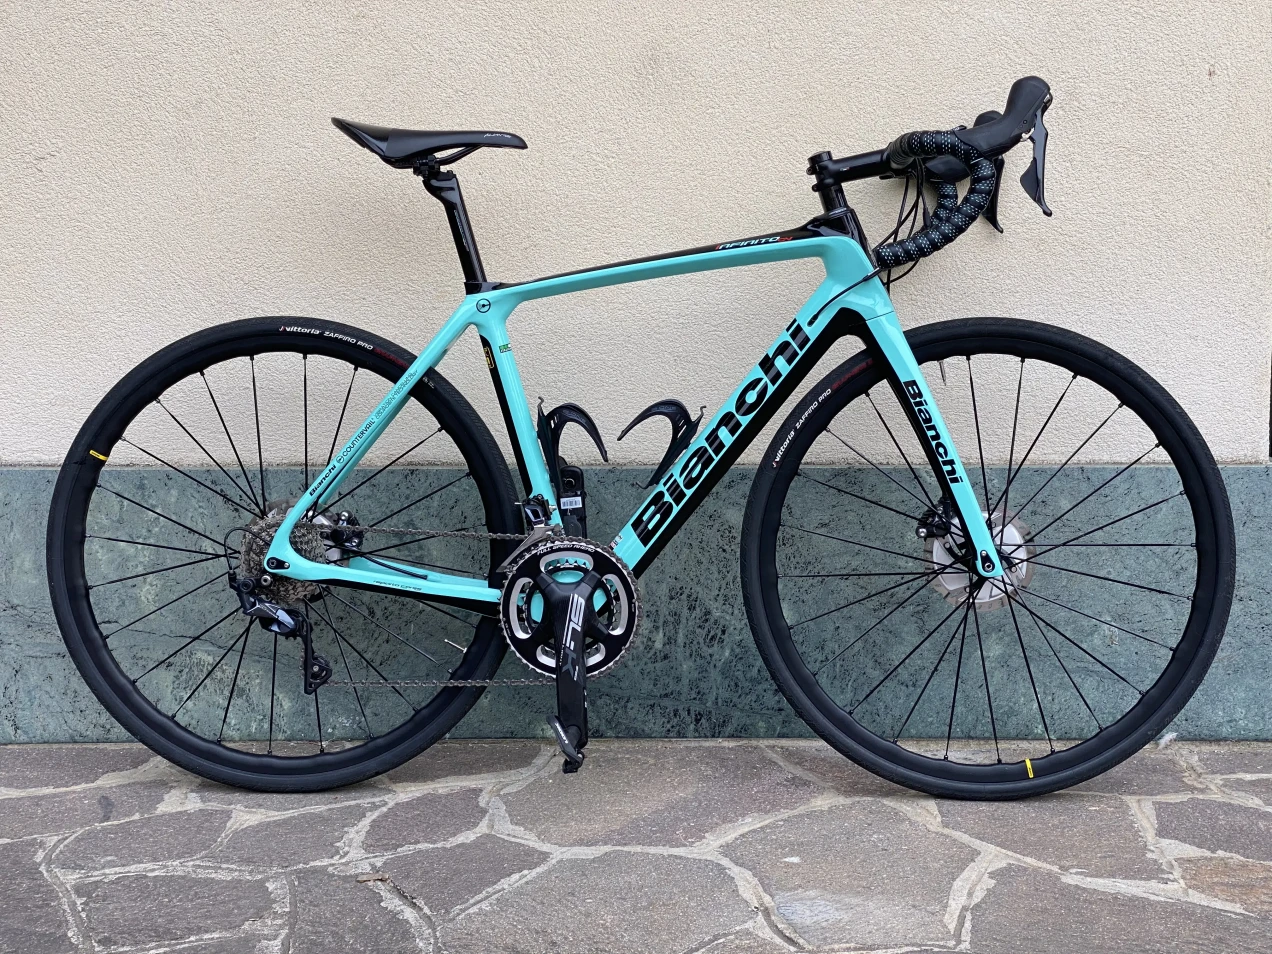 Bianchi Infinito CV Ultegra used in 53 cm | buycycle